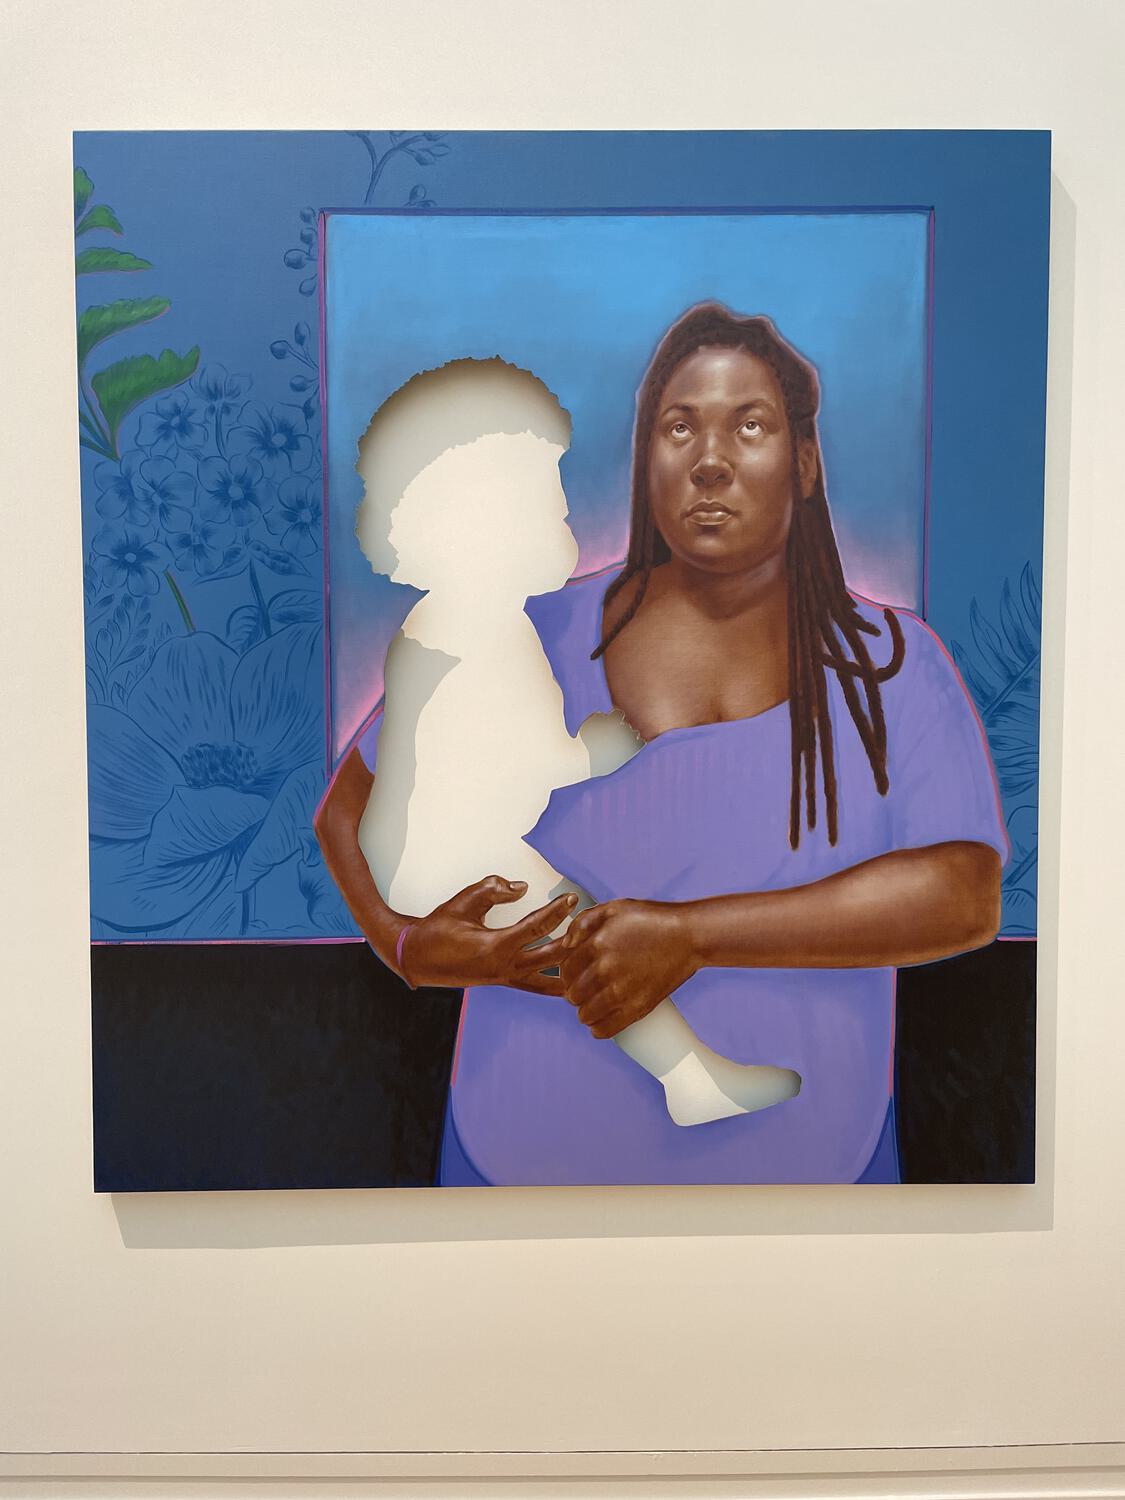 A painting of a Black woman holding a baby in her arms and looking up to the sky. The baby has been cut out of the canvas, leaving a white silhouette of the wall in its place.